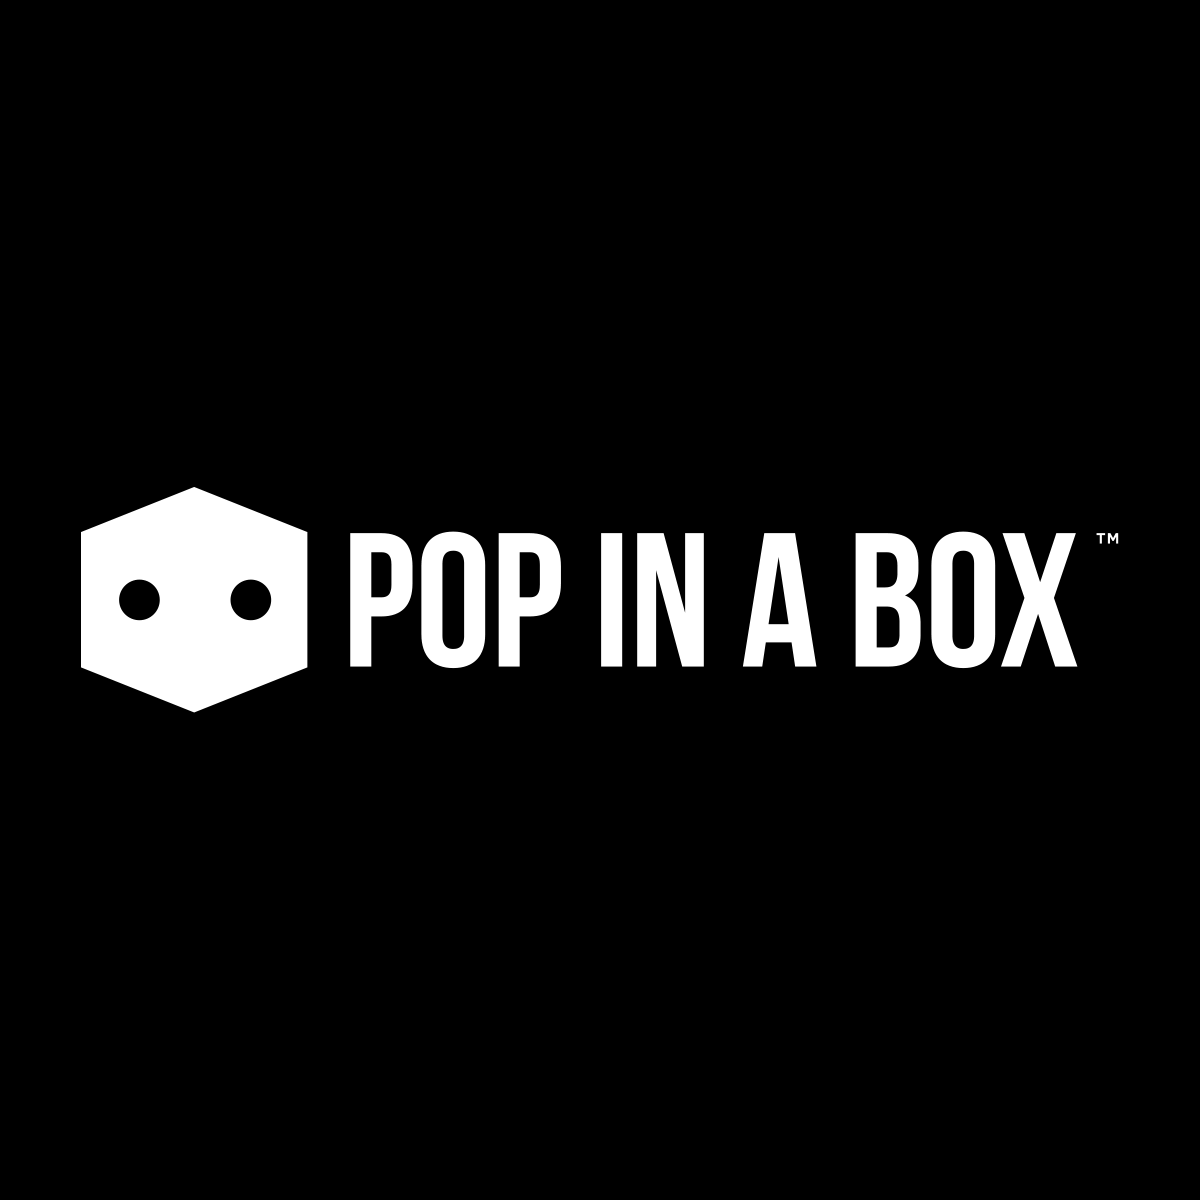 10% Off With Pop In A Box UK Promo Code